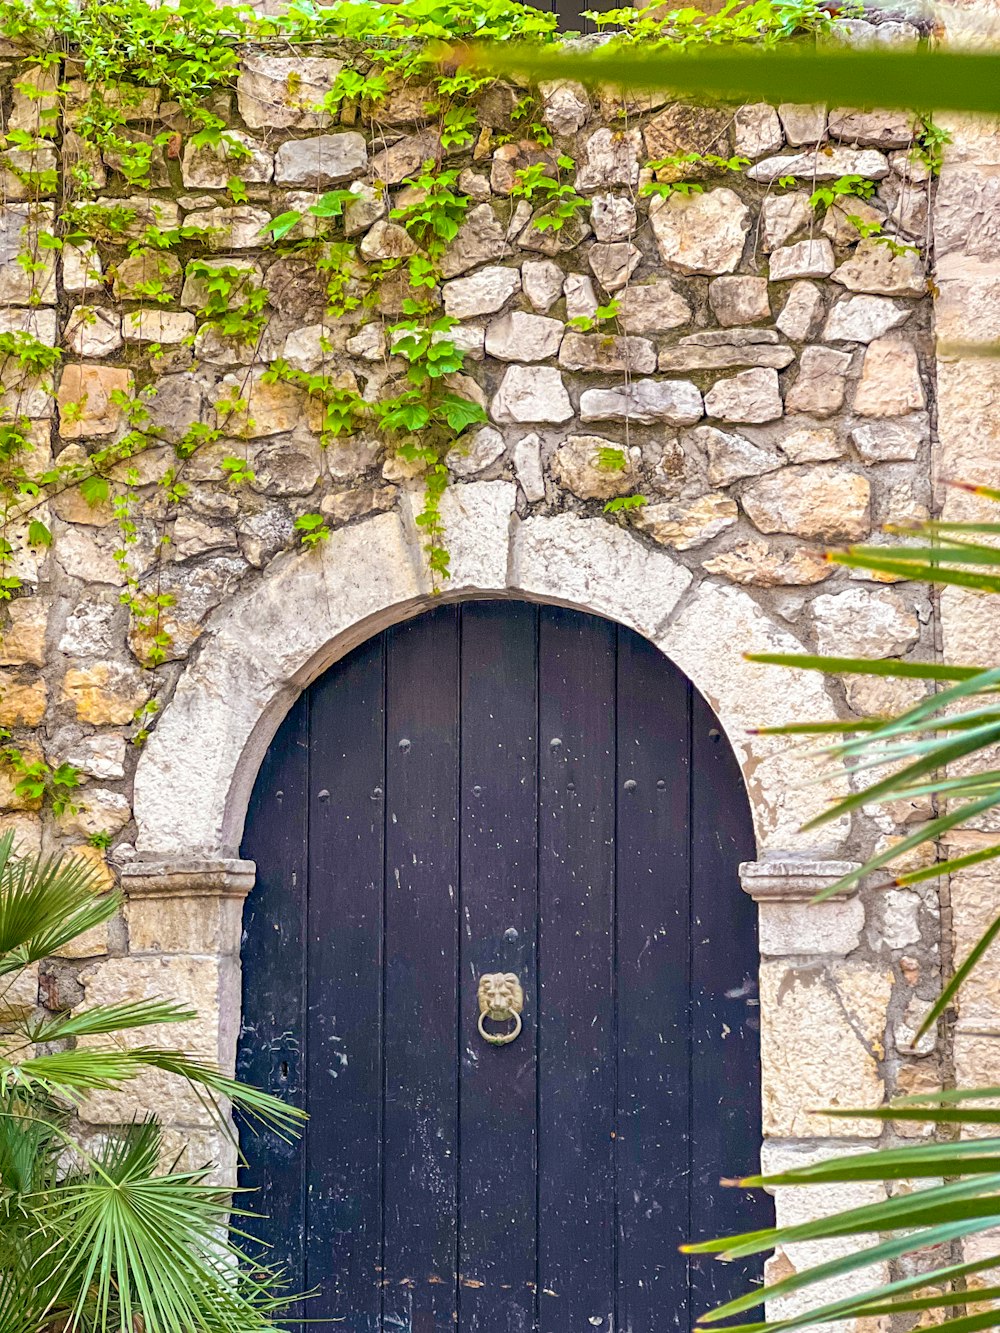 a stone building with a blue door surrounded by greenery